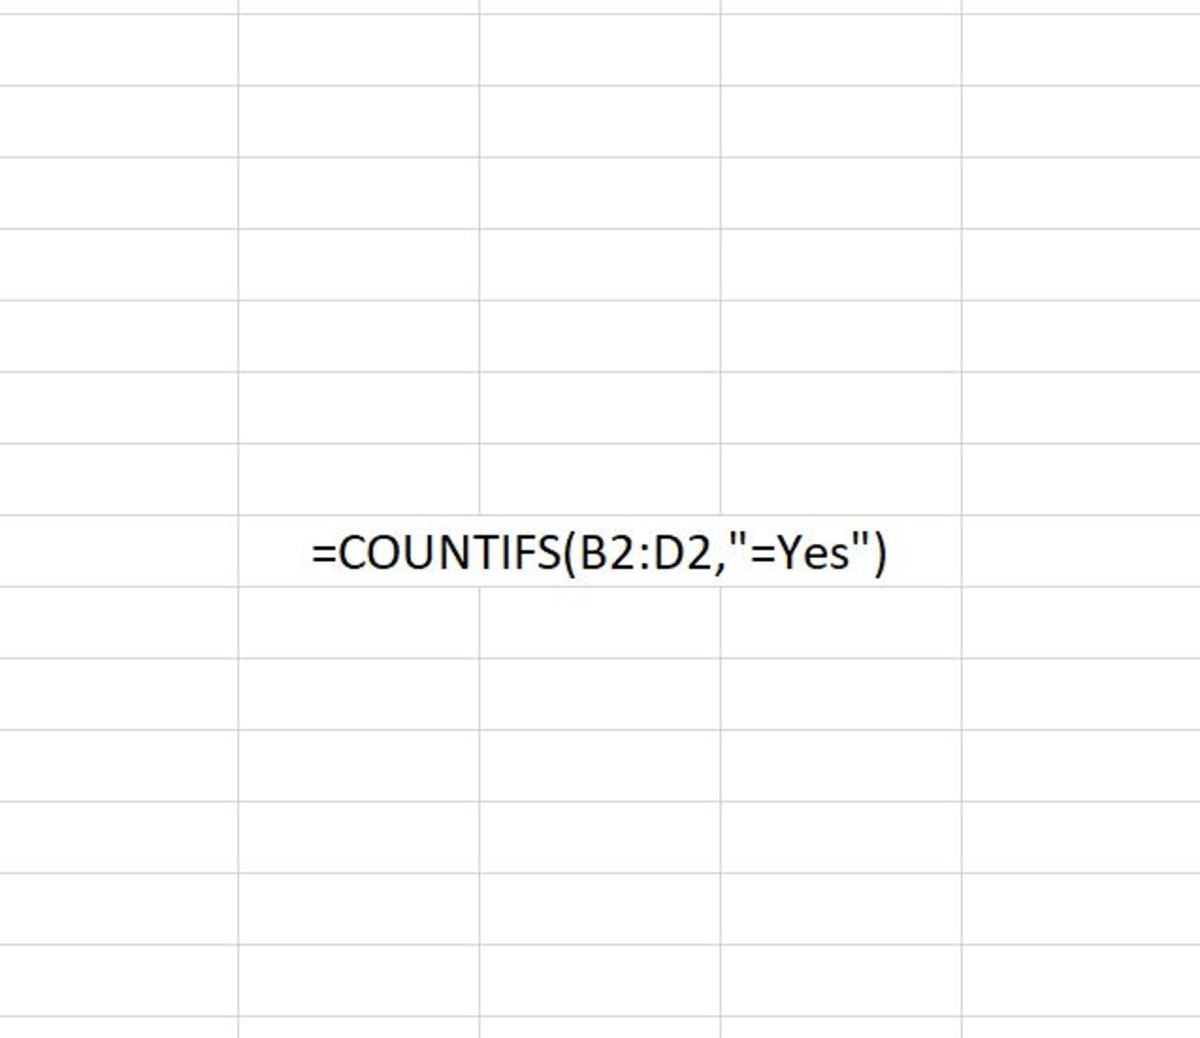 The COUNTIFS function is shown above after typed into an Excel spreadsheet. The formula here is the simplest form of the COUNTIFS function where only one criteria is used to count.  